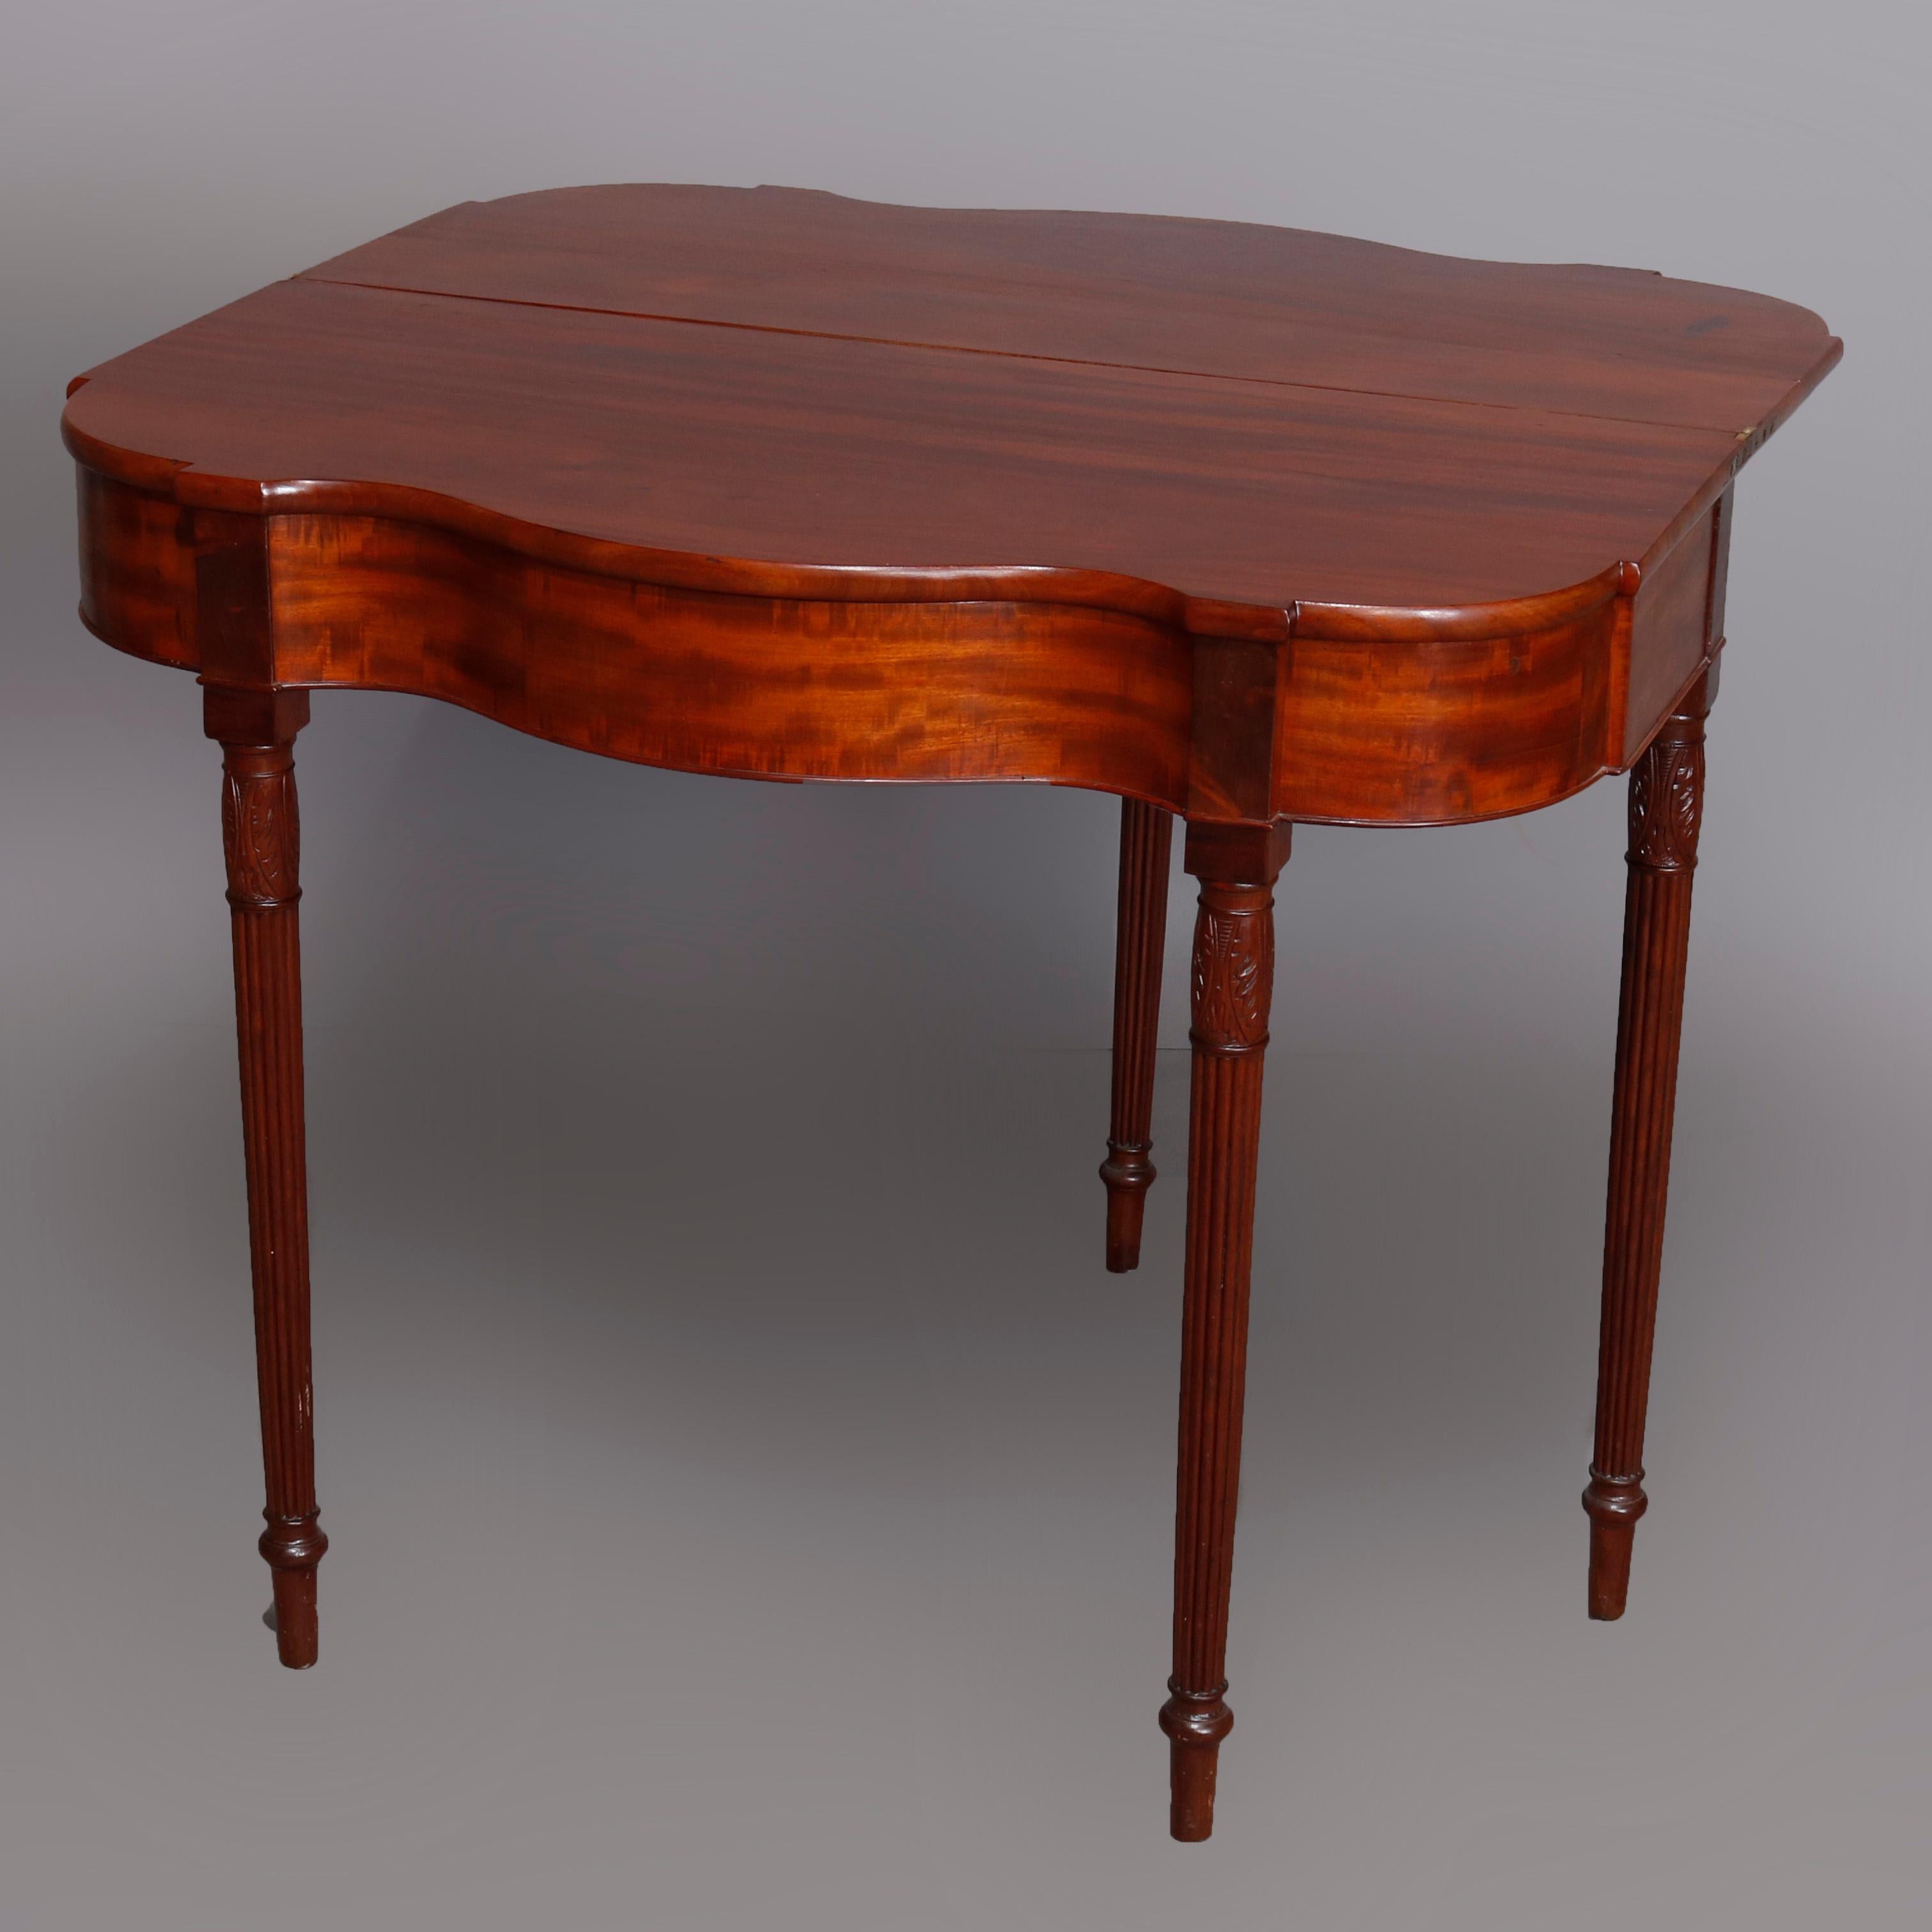 An antique Sheraton game table offers flame mahogany construction having shaped flip top with serpentine skirt and raised on turned legs, circa 1810

***DELIVERY NOTICE – Due to COVID-19 we are employing NO-CONTACT PRACTICES in the transfer of